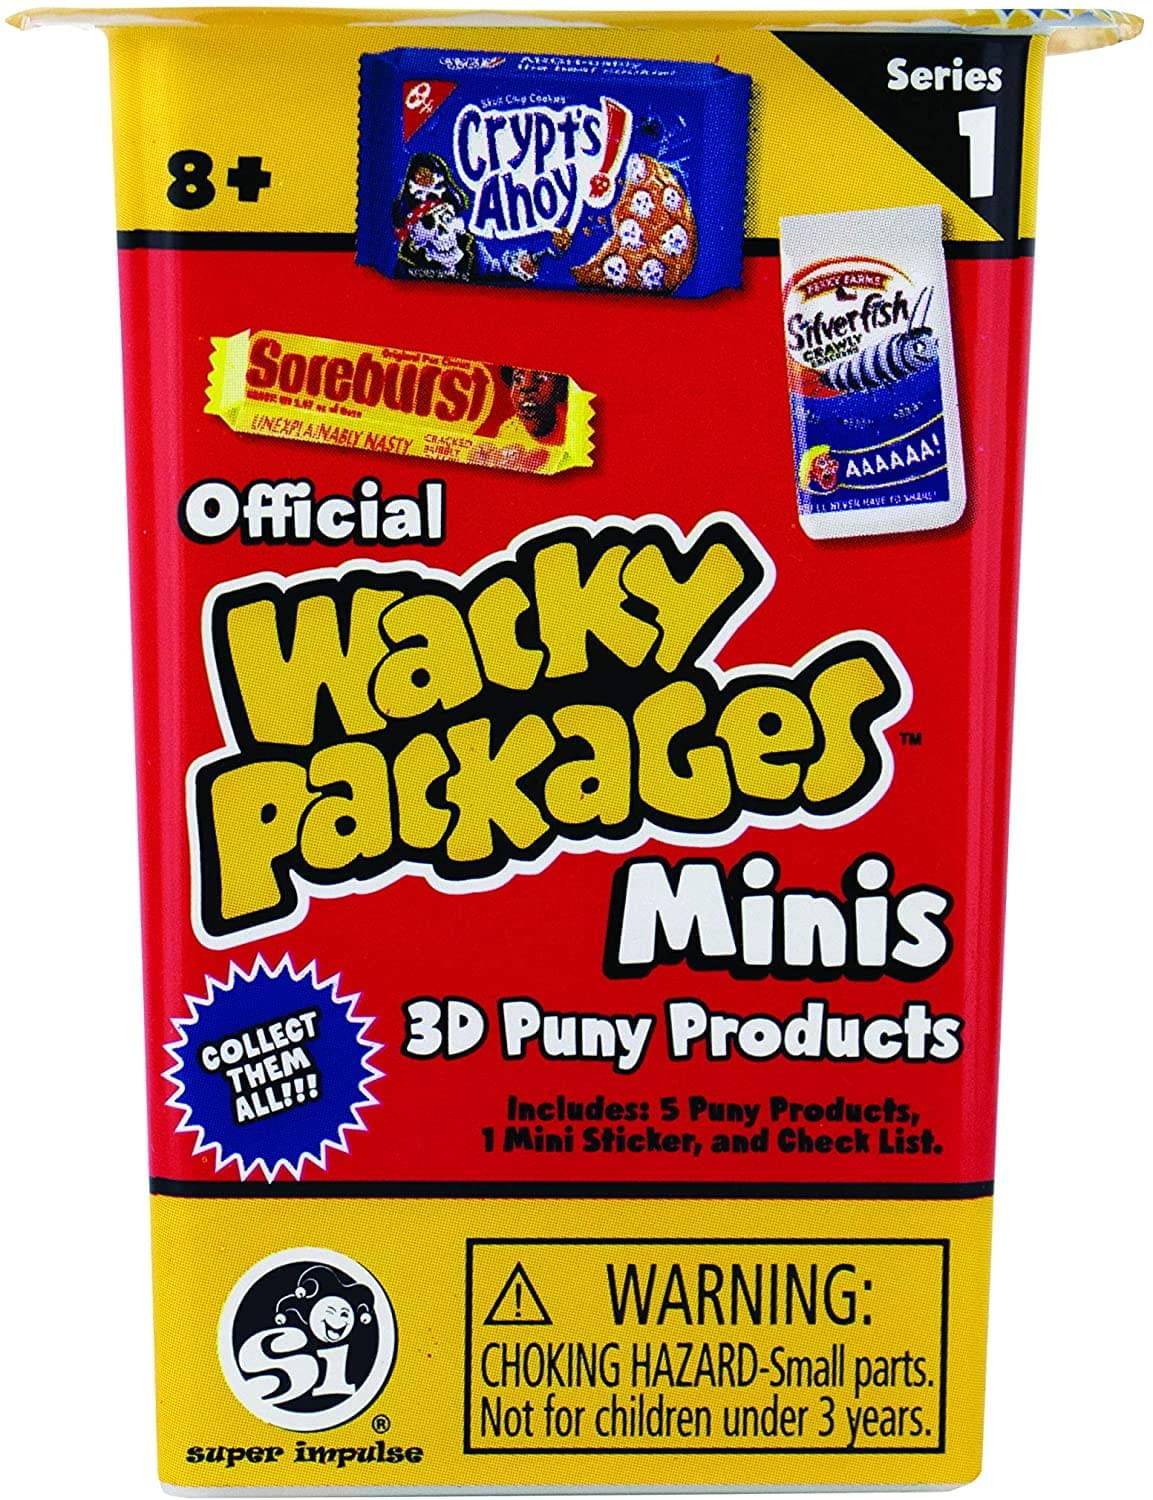 2020 Wacky Packages Old School Series 9 Complete Graduation Photos YOU PICK 